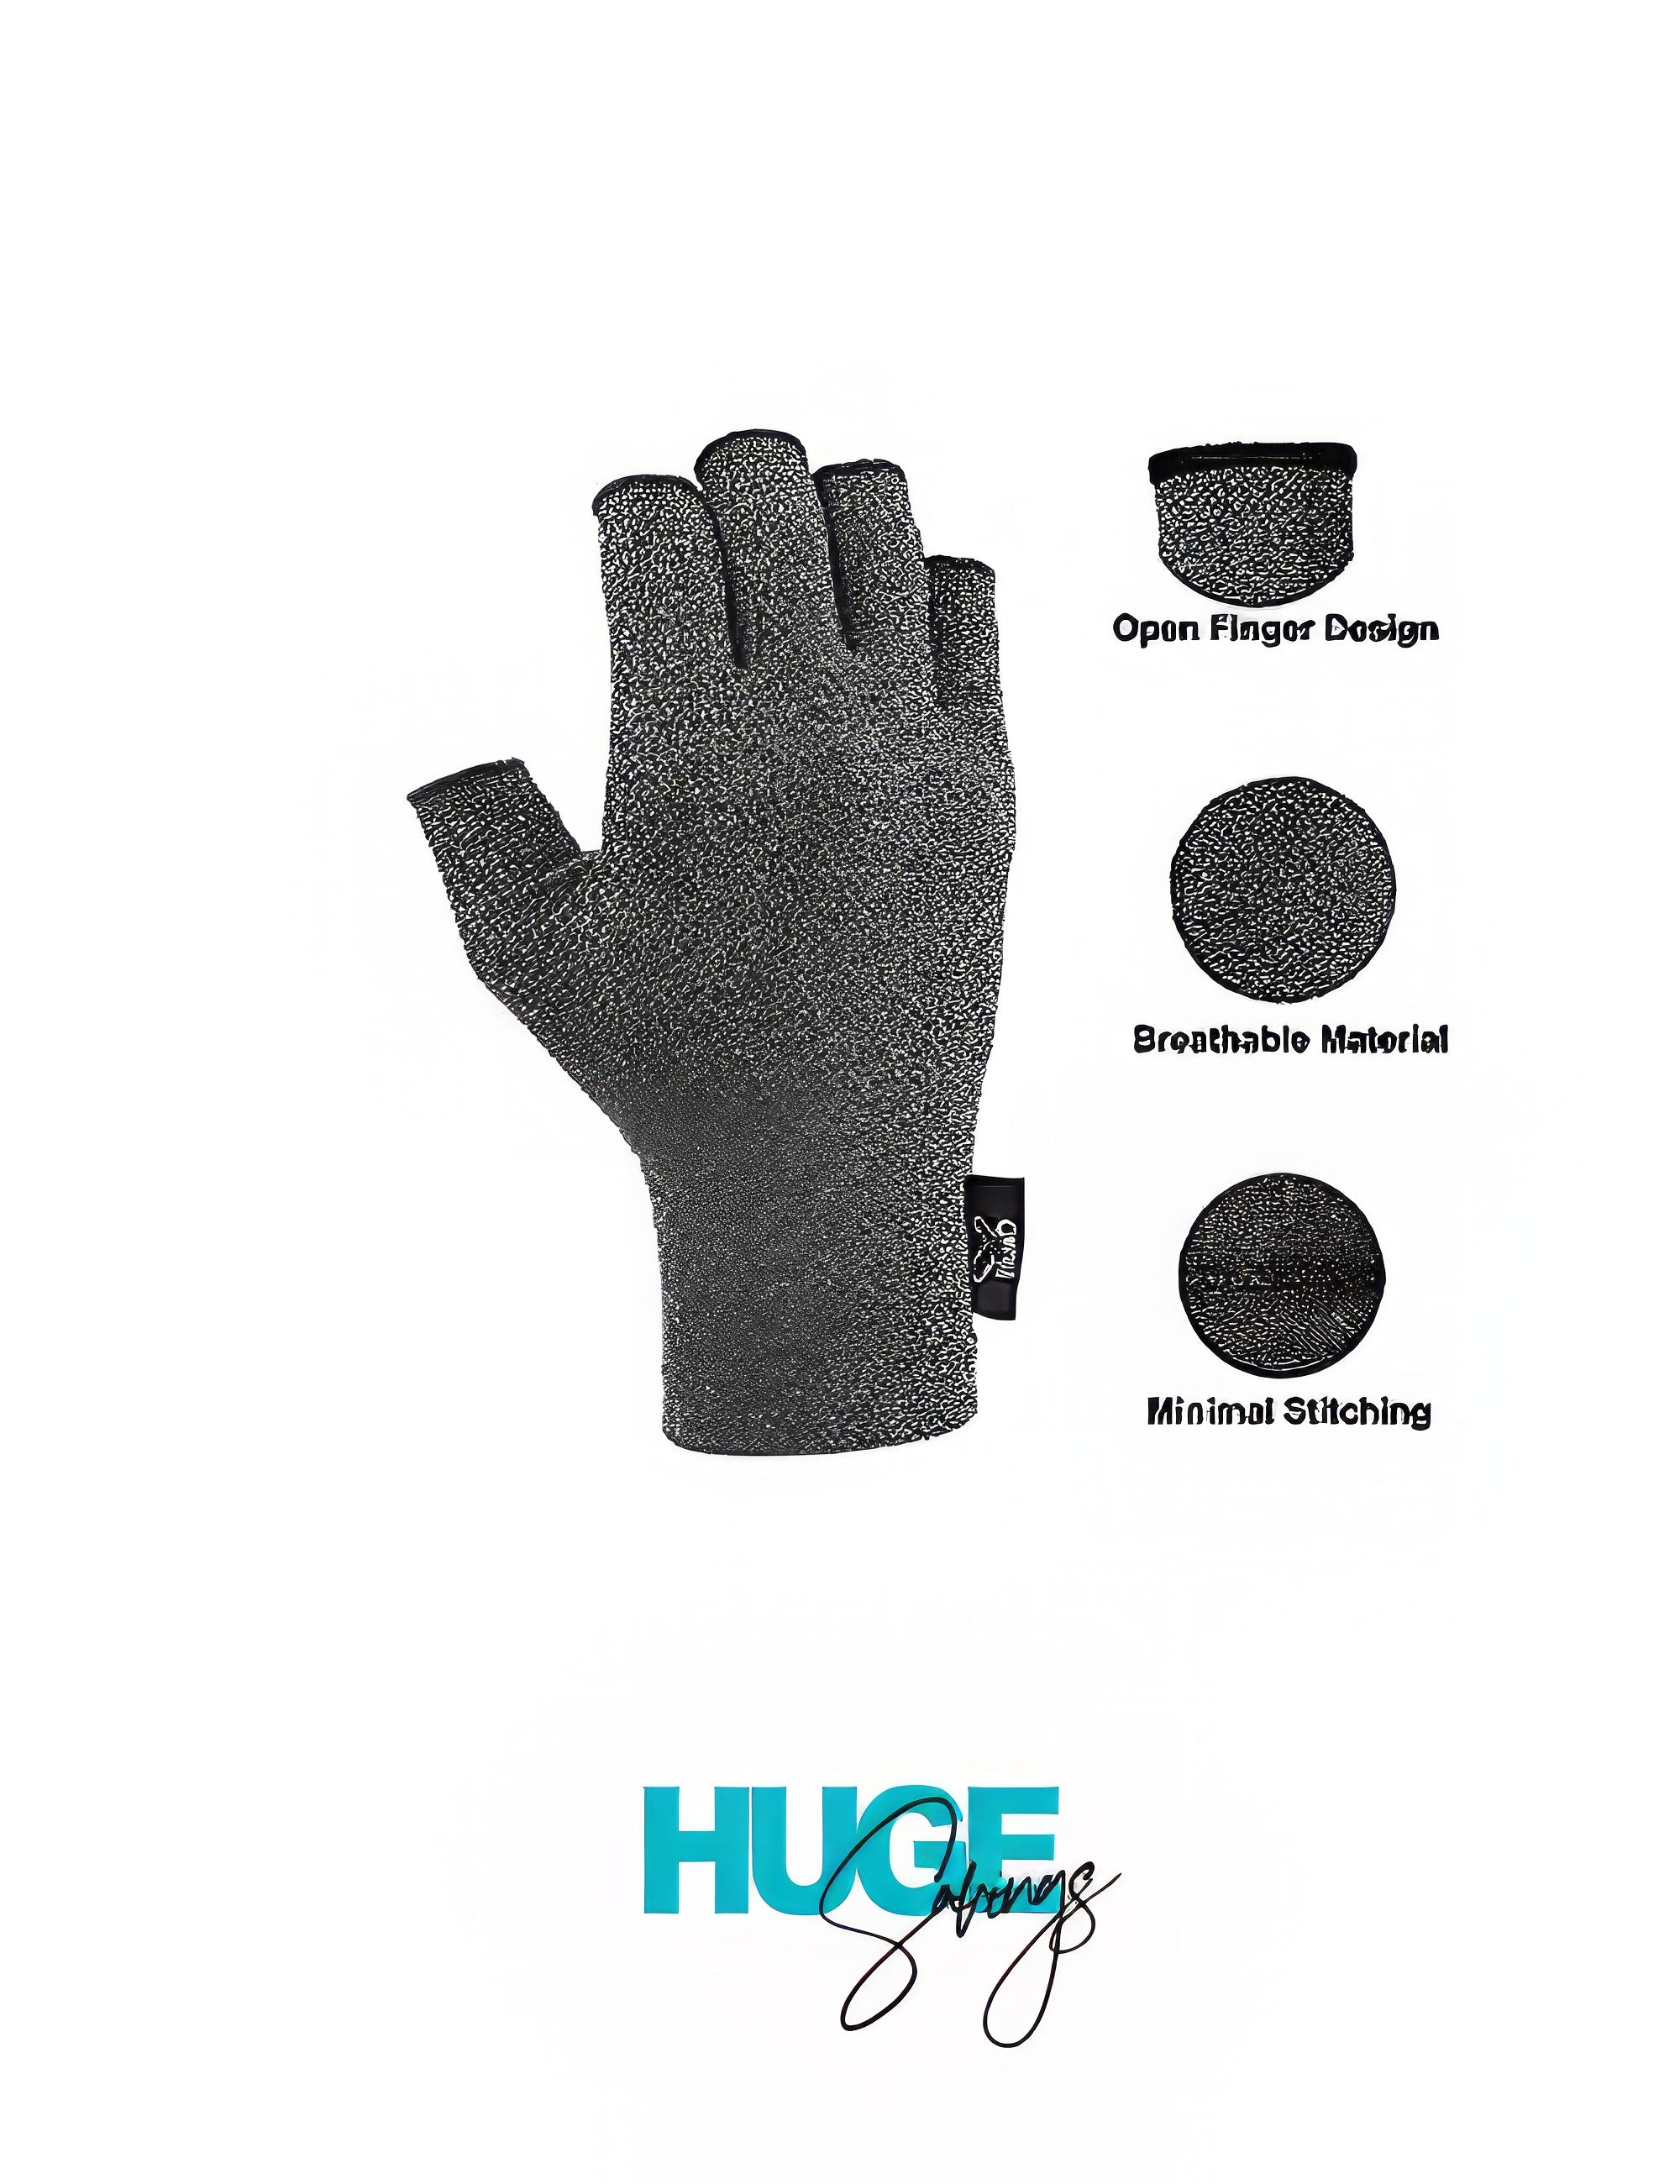 2 Pairs Arthritis Gloves, Compression Gloves for Women and Men, Fingerless Design to Relieve Pain from Rheumatoid Arthritis and Osteoarthritis   (NC)